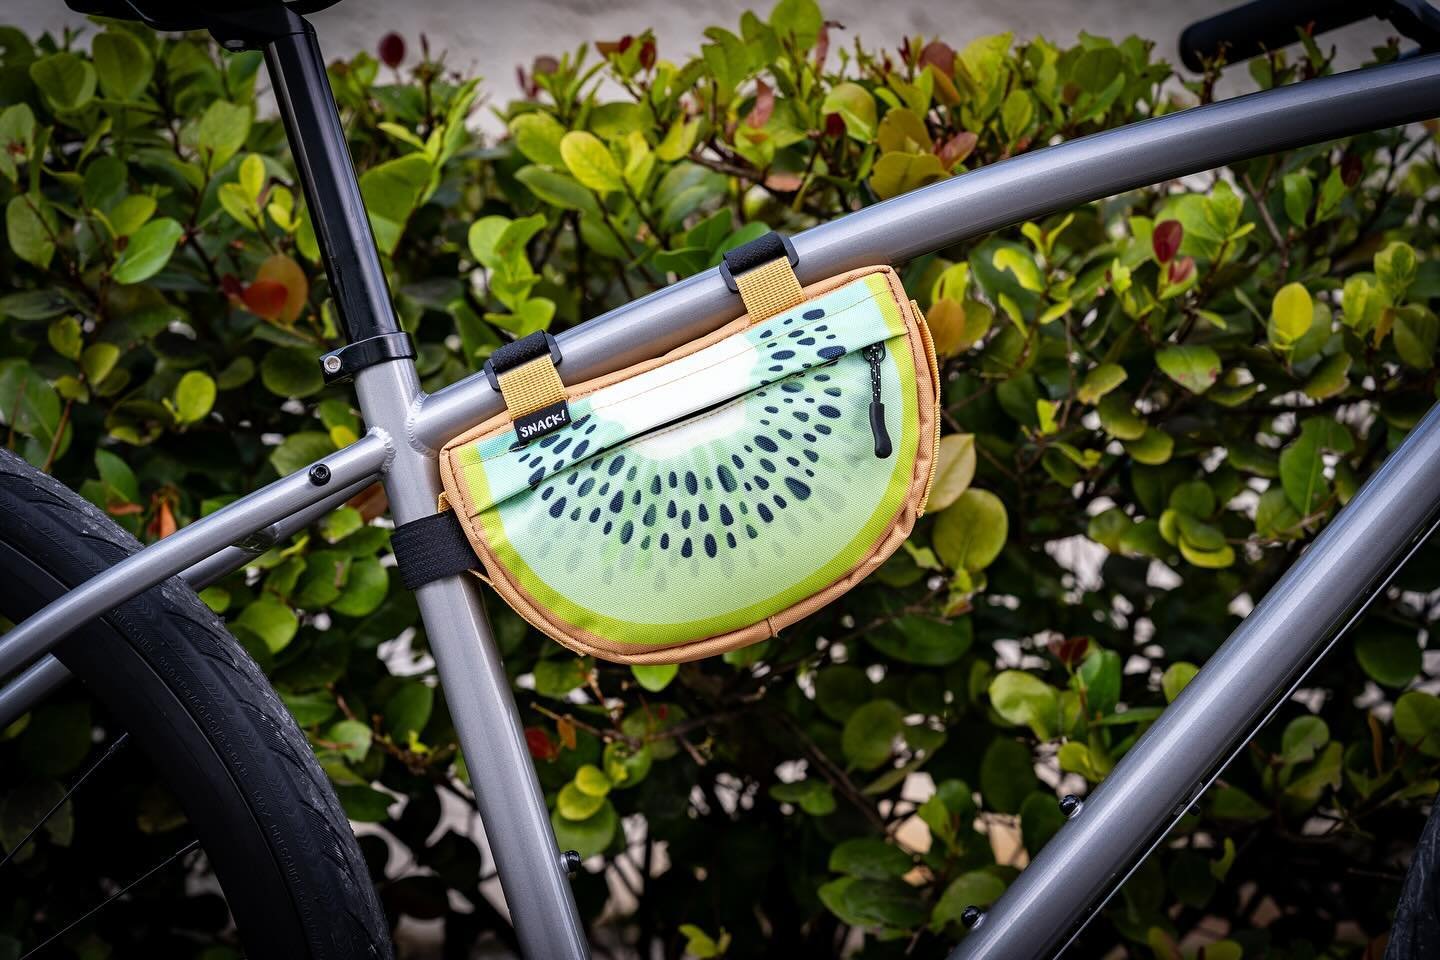 Kiwi-licious! Juice up your ride by carrying your tools, treats, and essentials with ease with the Kiwi frame Bag 🥝🥝🥝😋😋😋

#SnackSocialClub #SnackBike #snackride #ridesnacks #SnackBag #framebag #snack #bikebag #bicycleframebag #cycling #foryou #